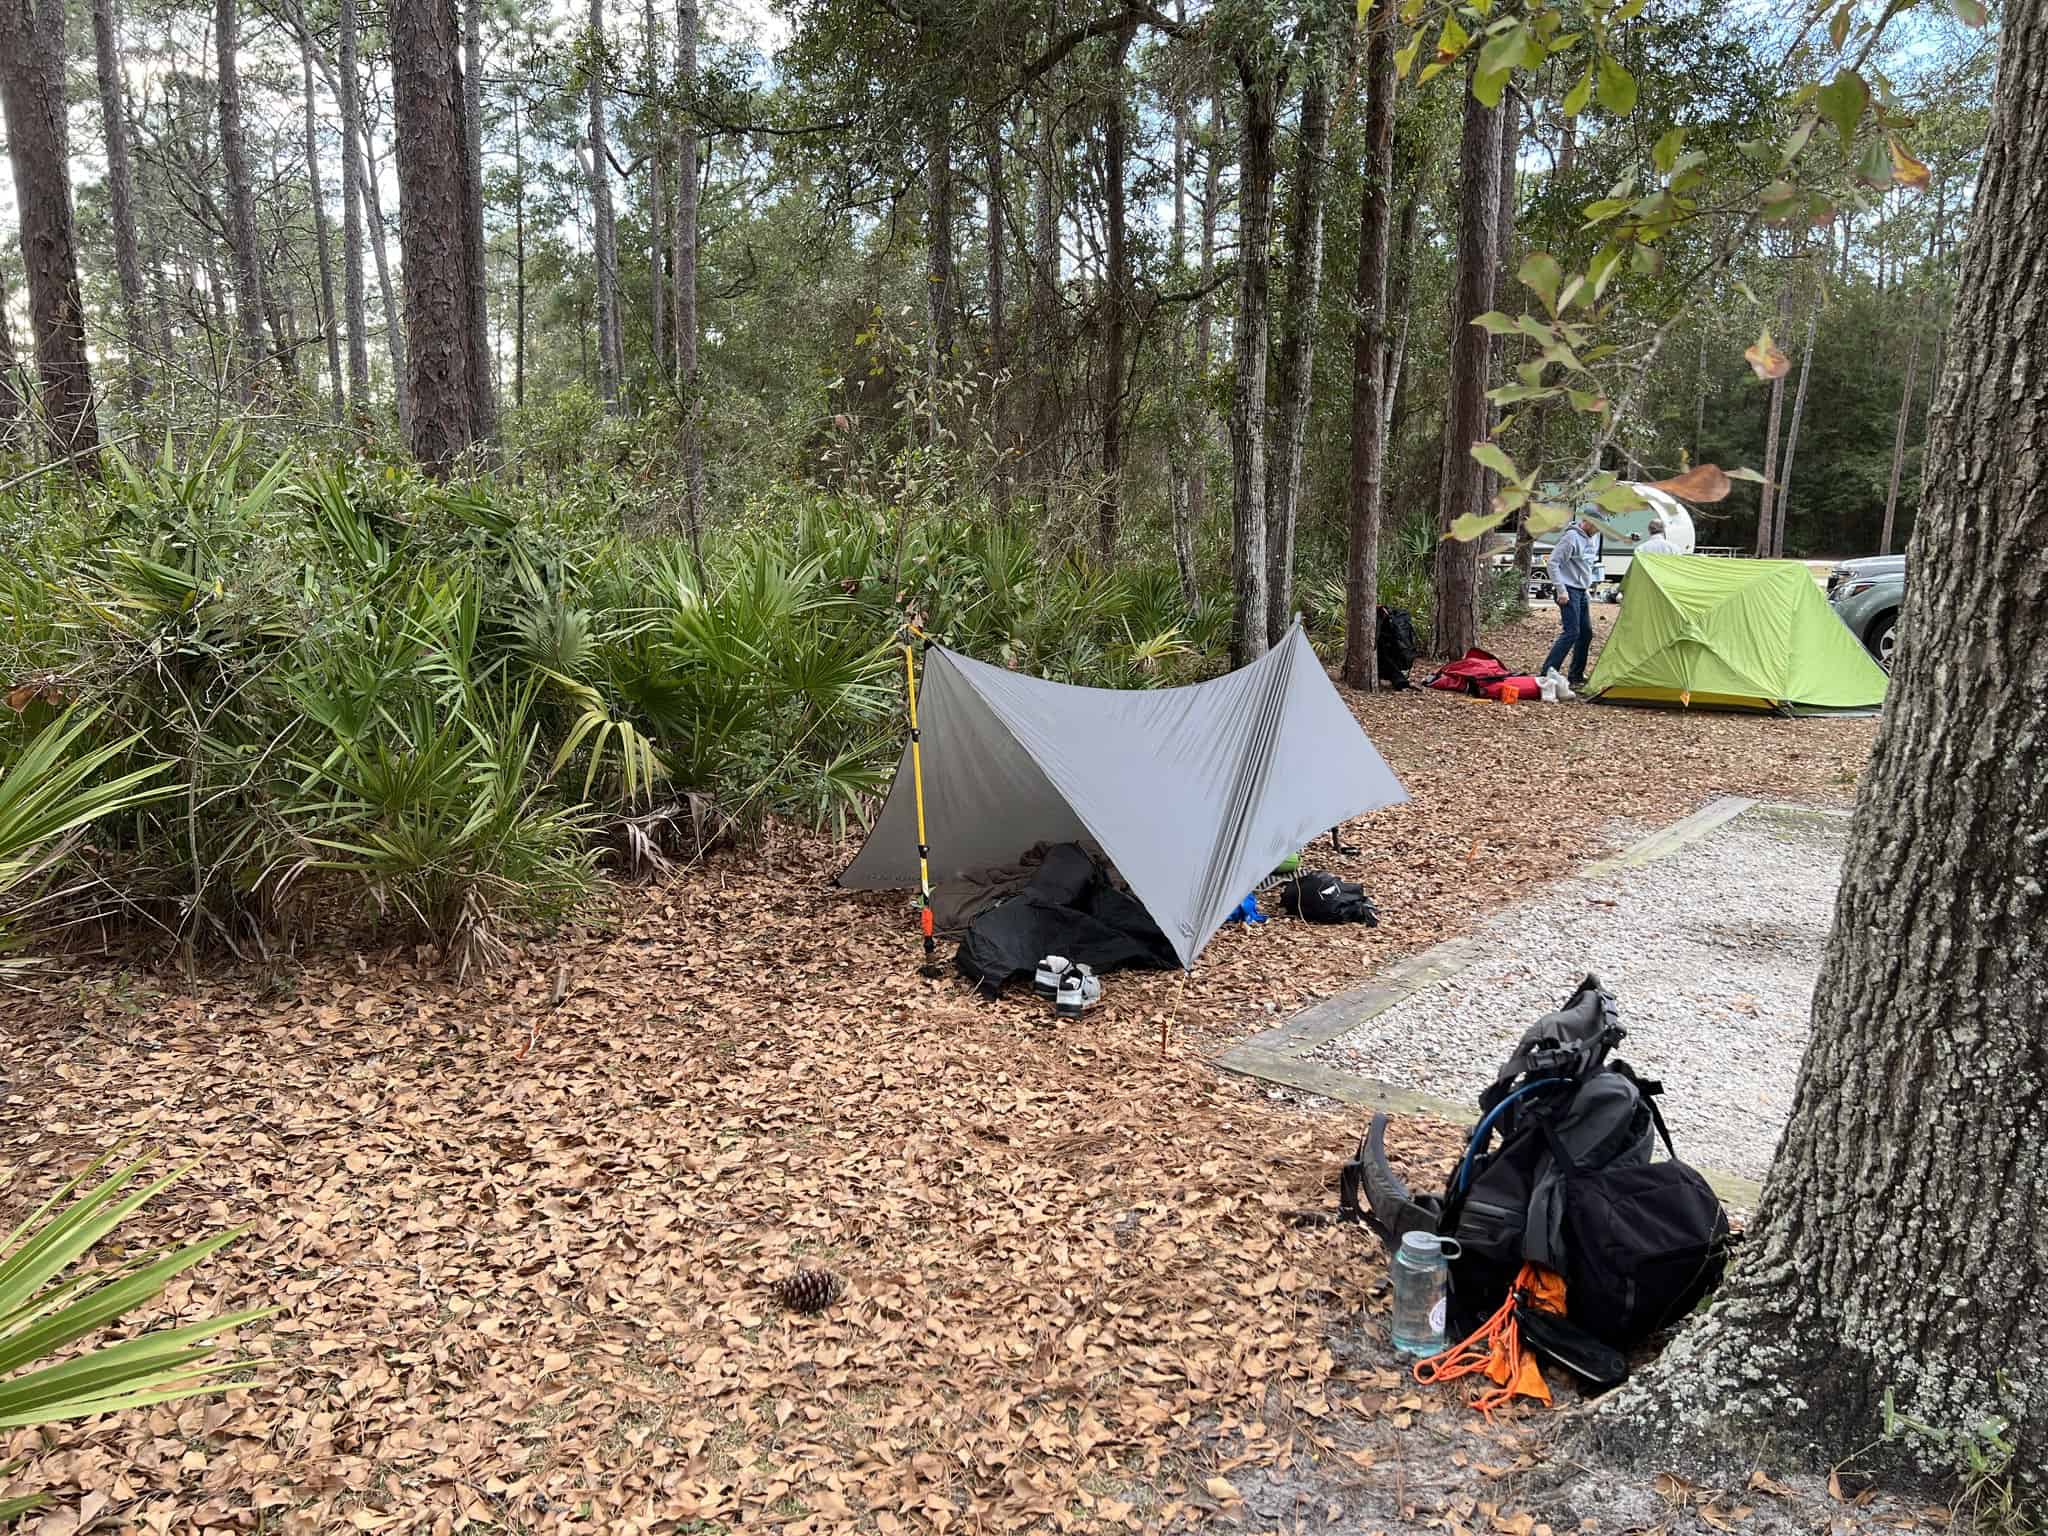 A tarp shelter with traditional tents in a forest in Florida